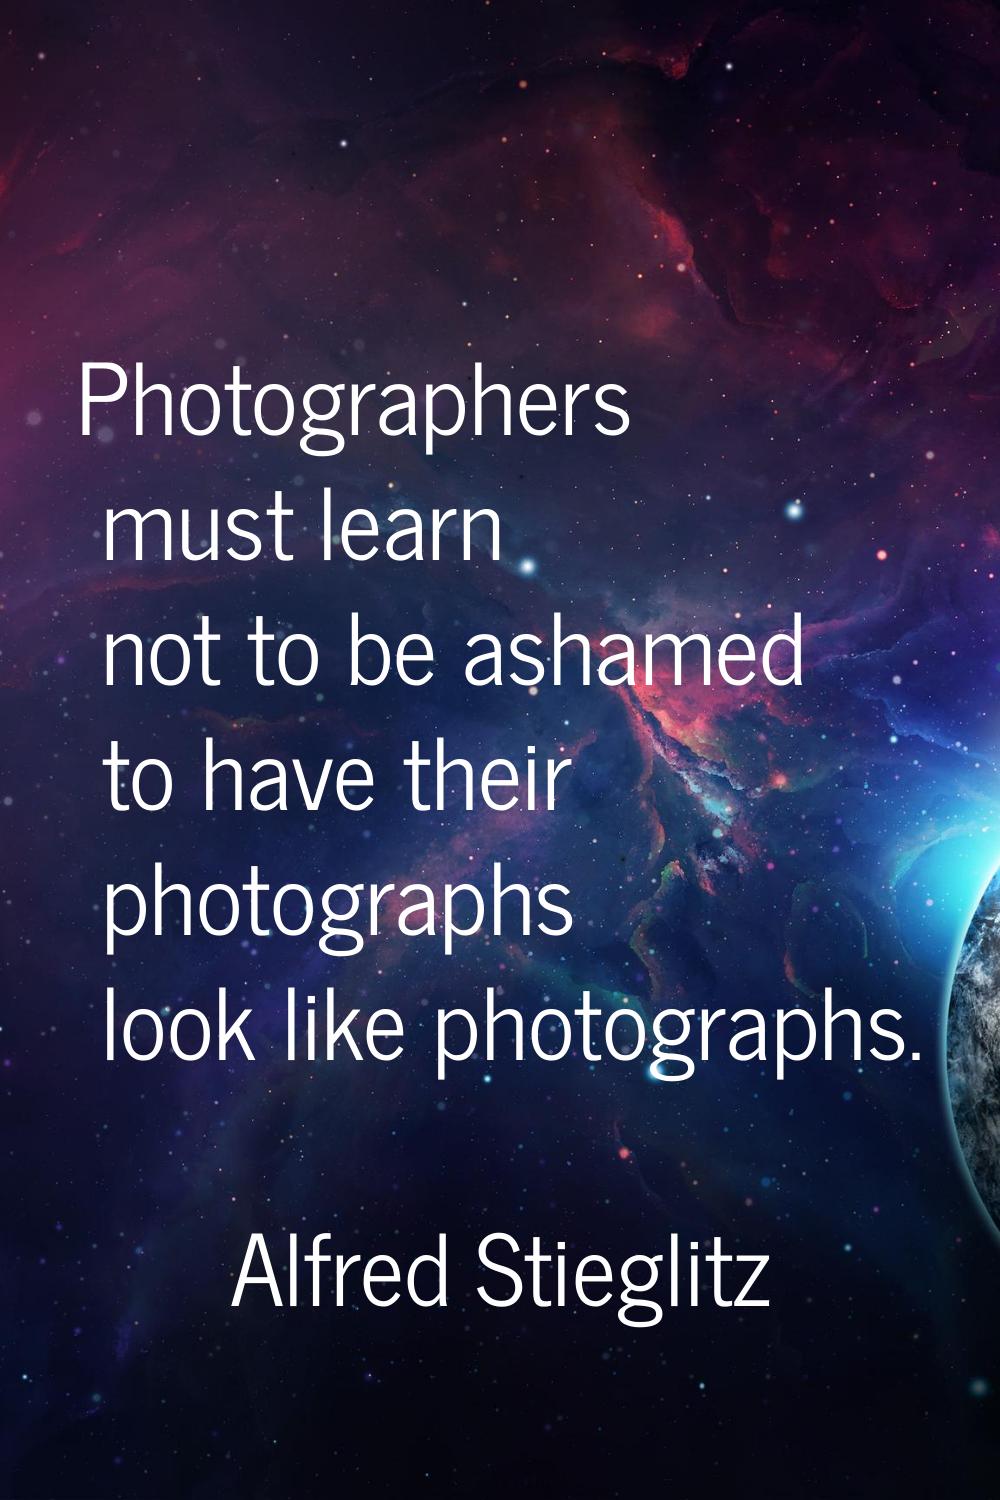 Photographers must learn not to be ashamed to have their photographs look like photographs.